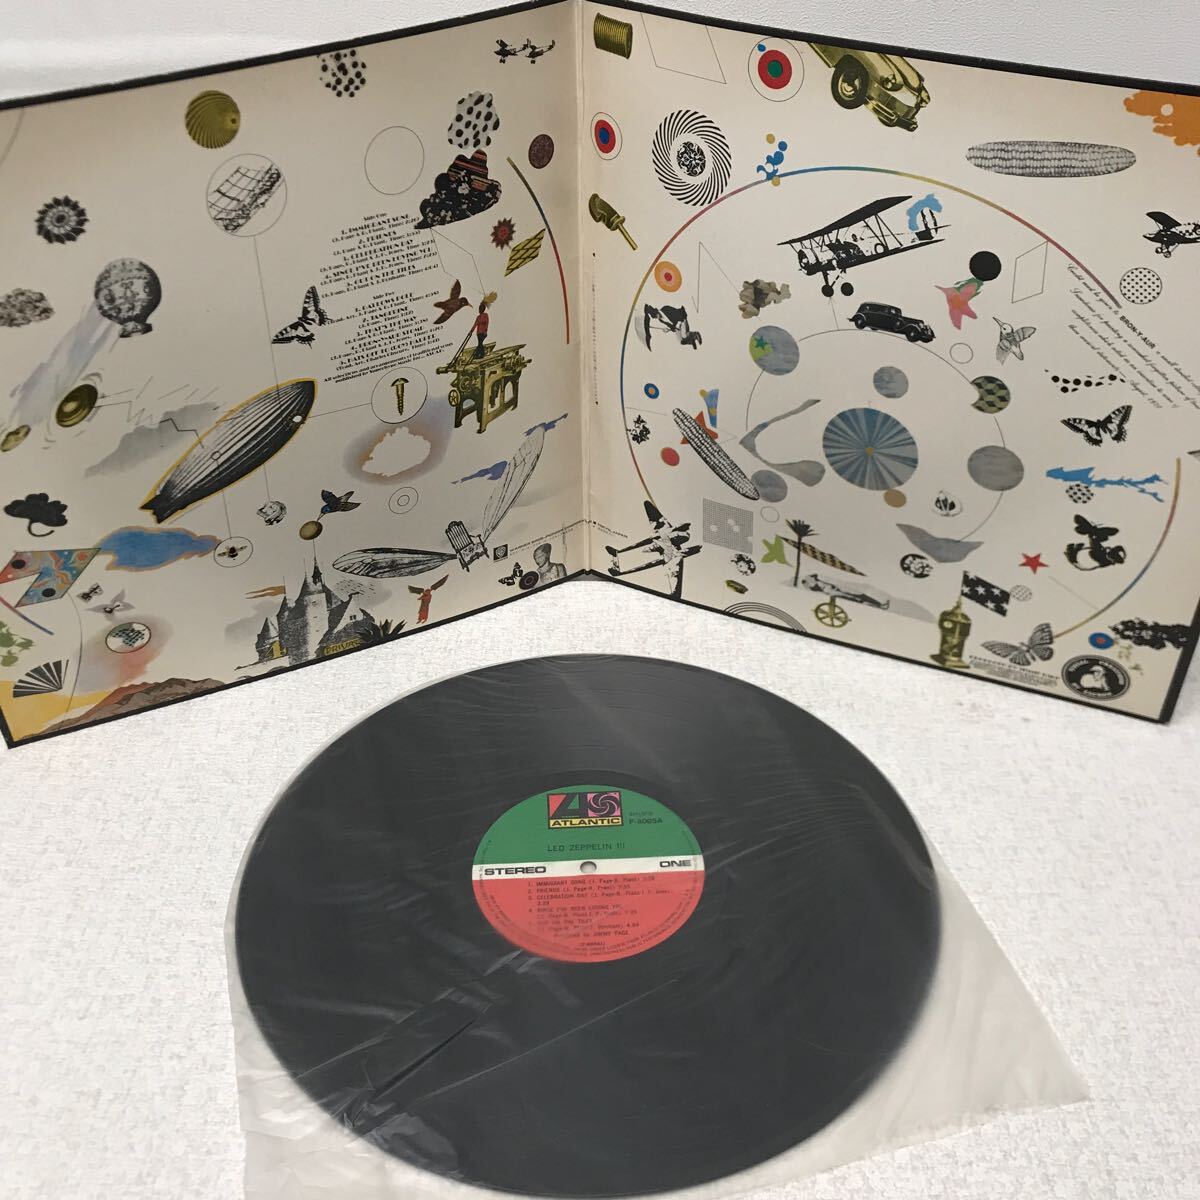 I0517A3 まとめ★レッド・ツェッペリン LED-ZEPPELIN LP レコード 4巻セット 音楽 洋楽 ロックⅠ Ⅱ Ⅲ / THE SONG REMAINS THE SAME 他_画像9